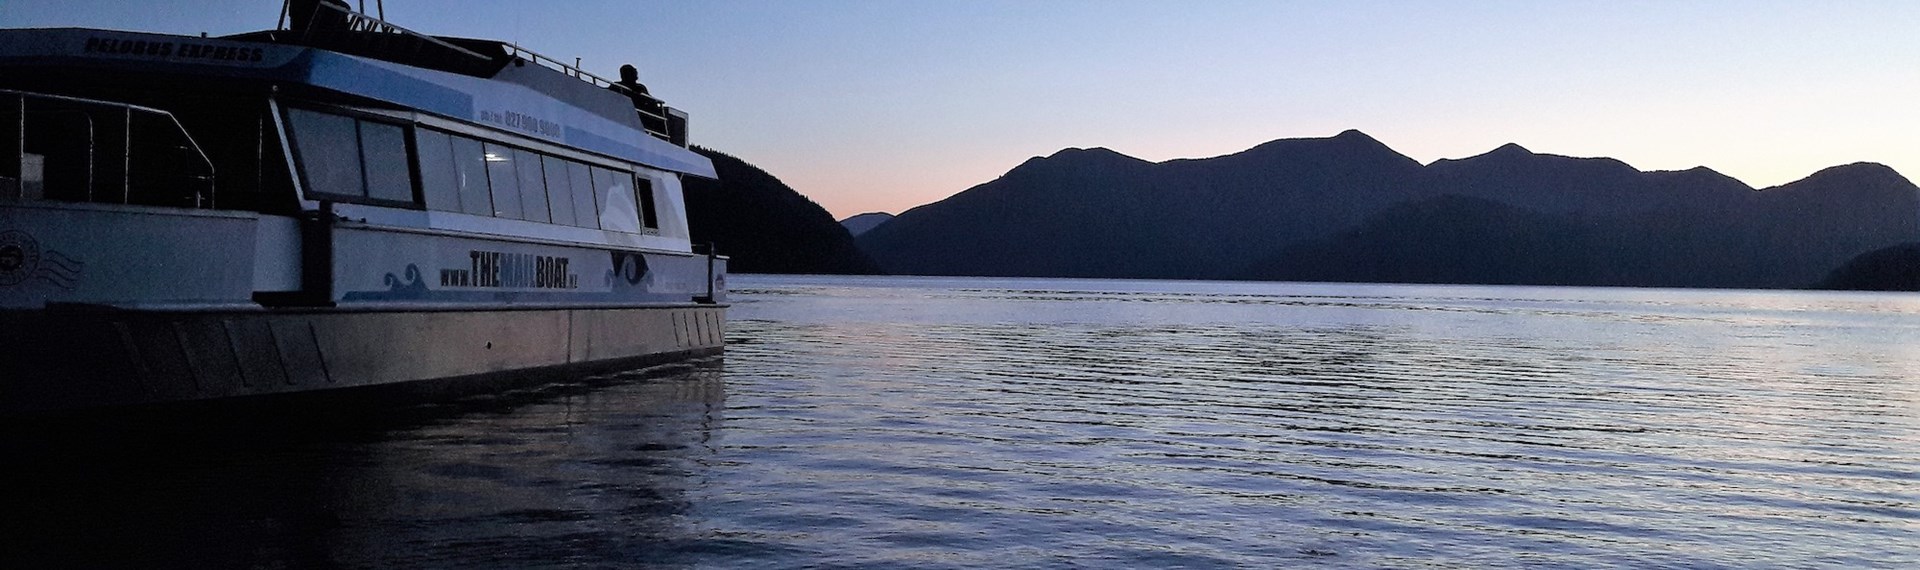 Pelorus Mail Boat at sunset in the water during a charter.